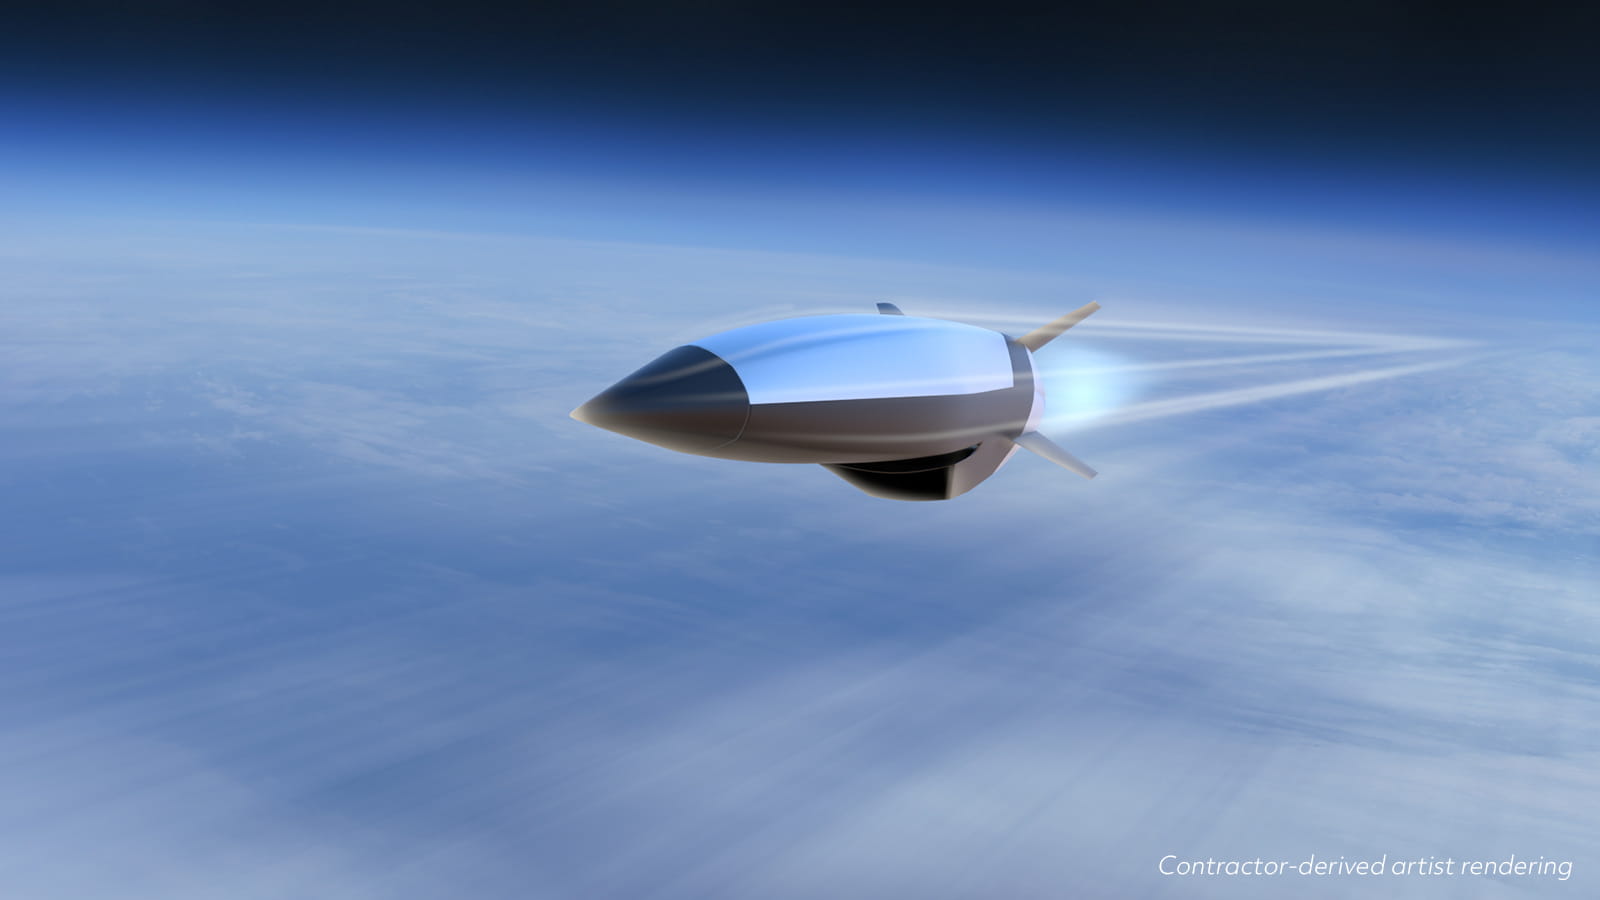 This rendering shows the Hypersonic Attack Cruise Missile, or HACM. The U.S. Air Force has selected Raytheon Missiles & Defense and Northrop Grumman to develop the first-of-its-kind weapon, which will use scramjets to reach speeds greater than Mach 5.